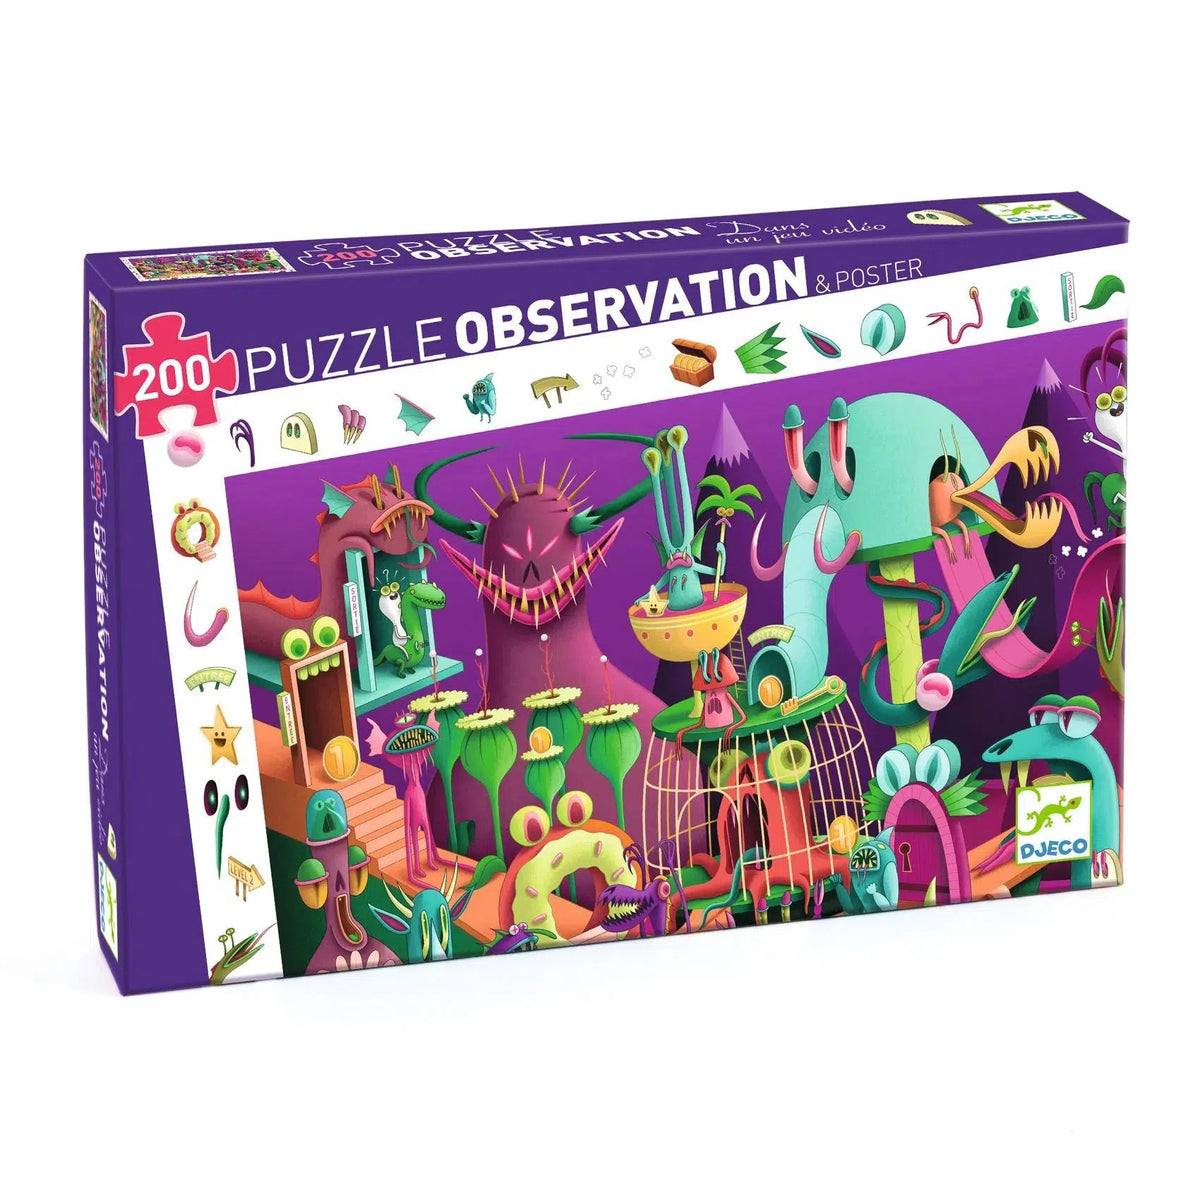 Front view of the In a Video Game Observation Puzzle in the box.